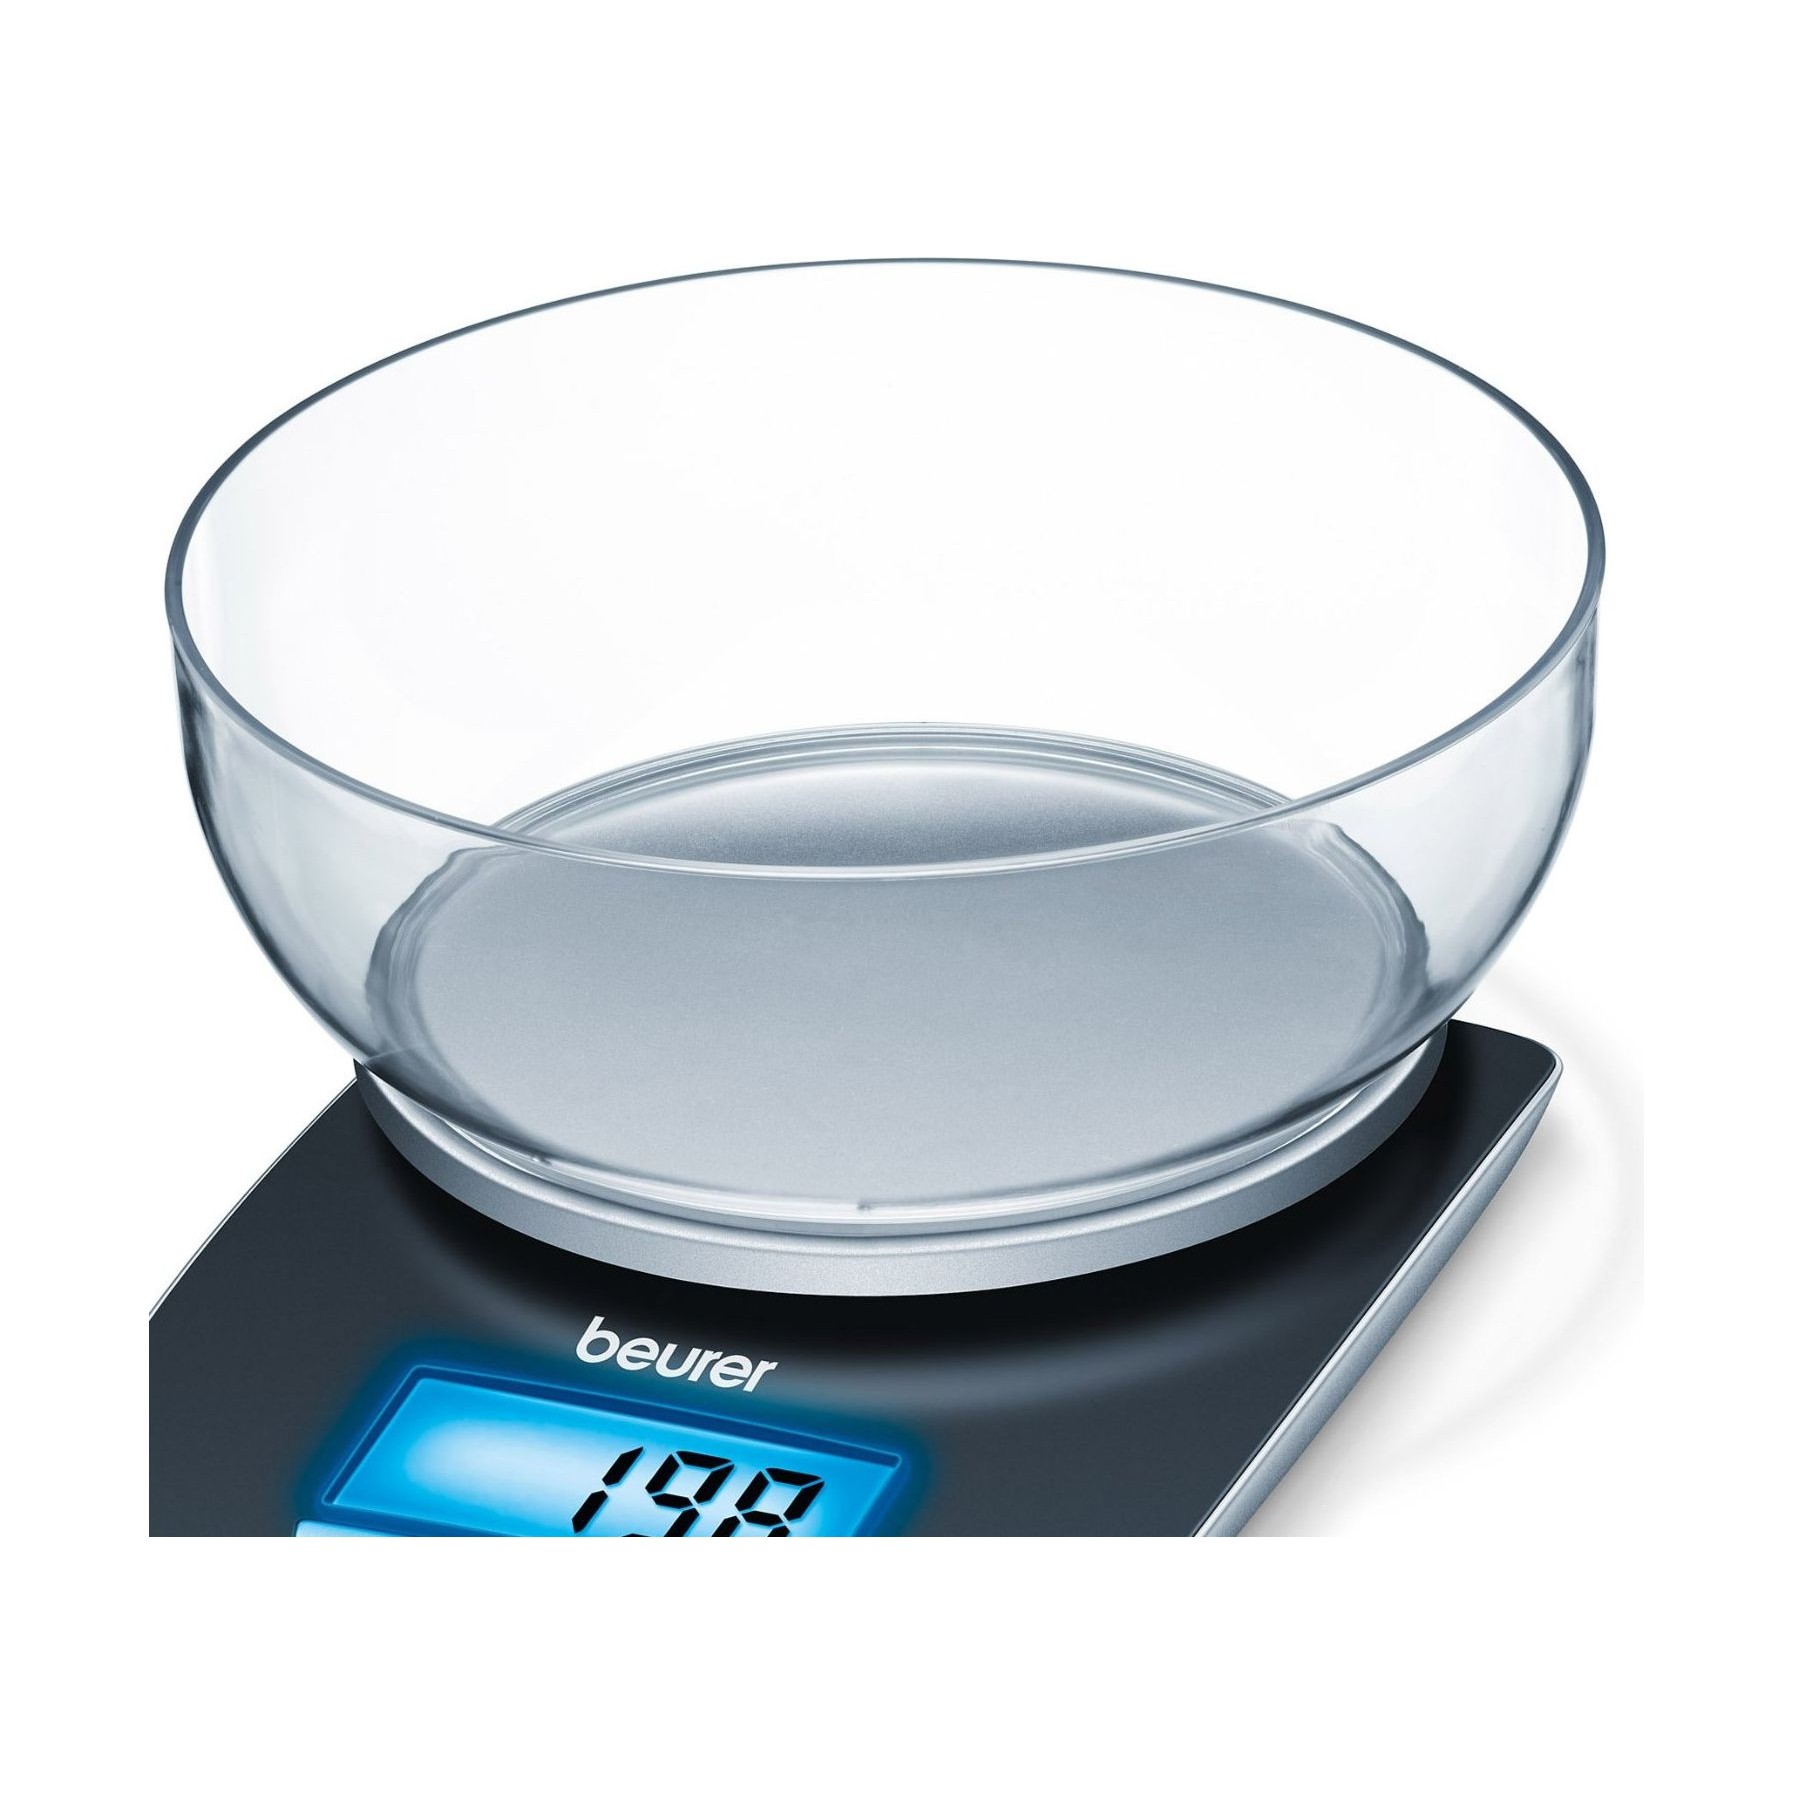 Beurer KS25 Electronic Digital Kitchen Scales with Bowl and Illuminated Display 